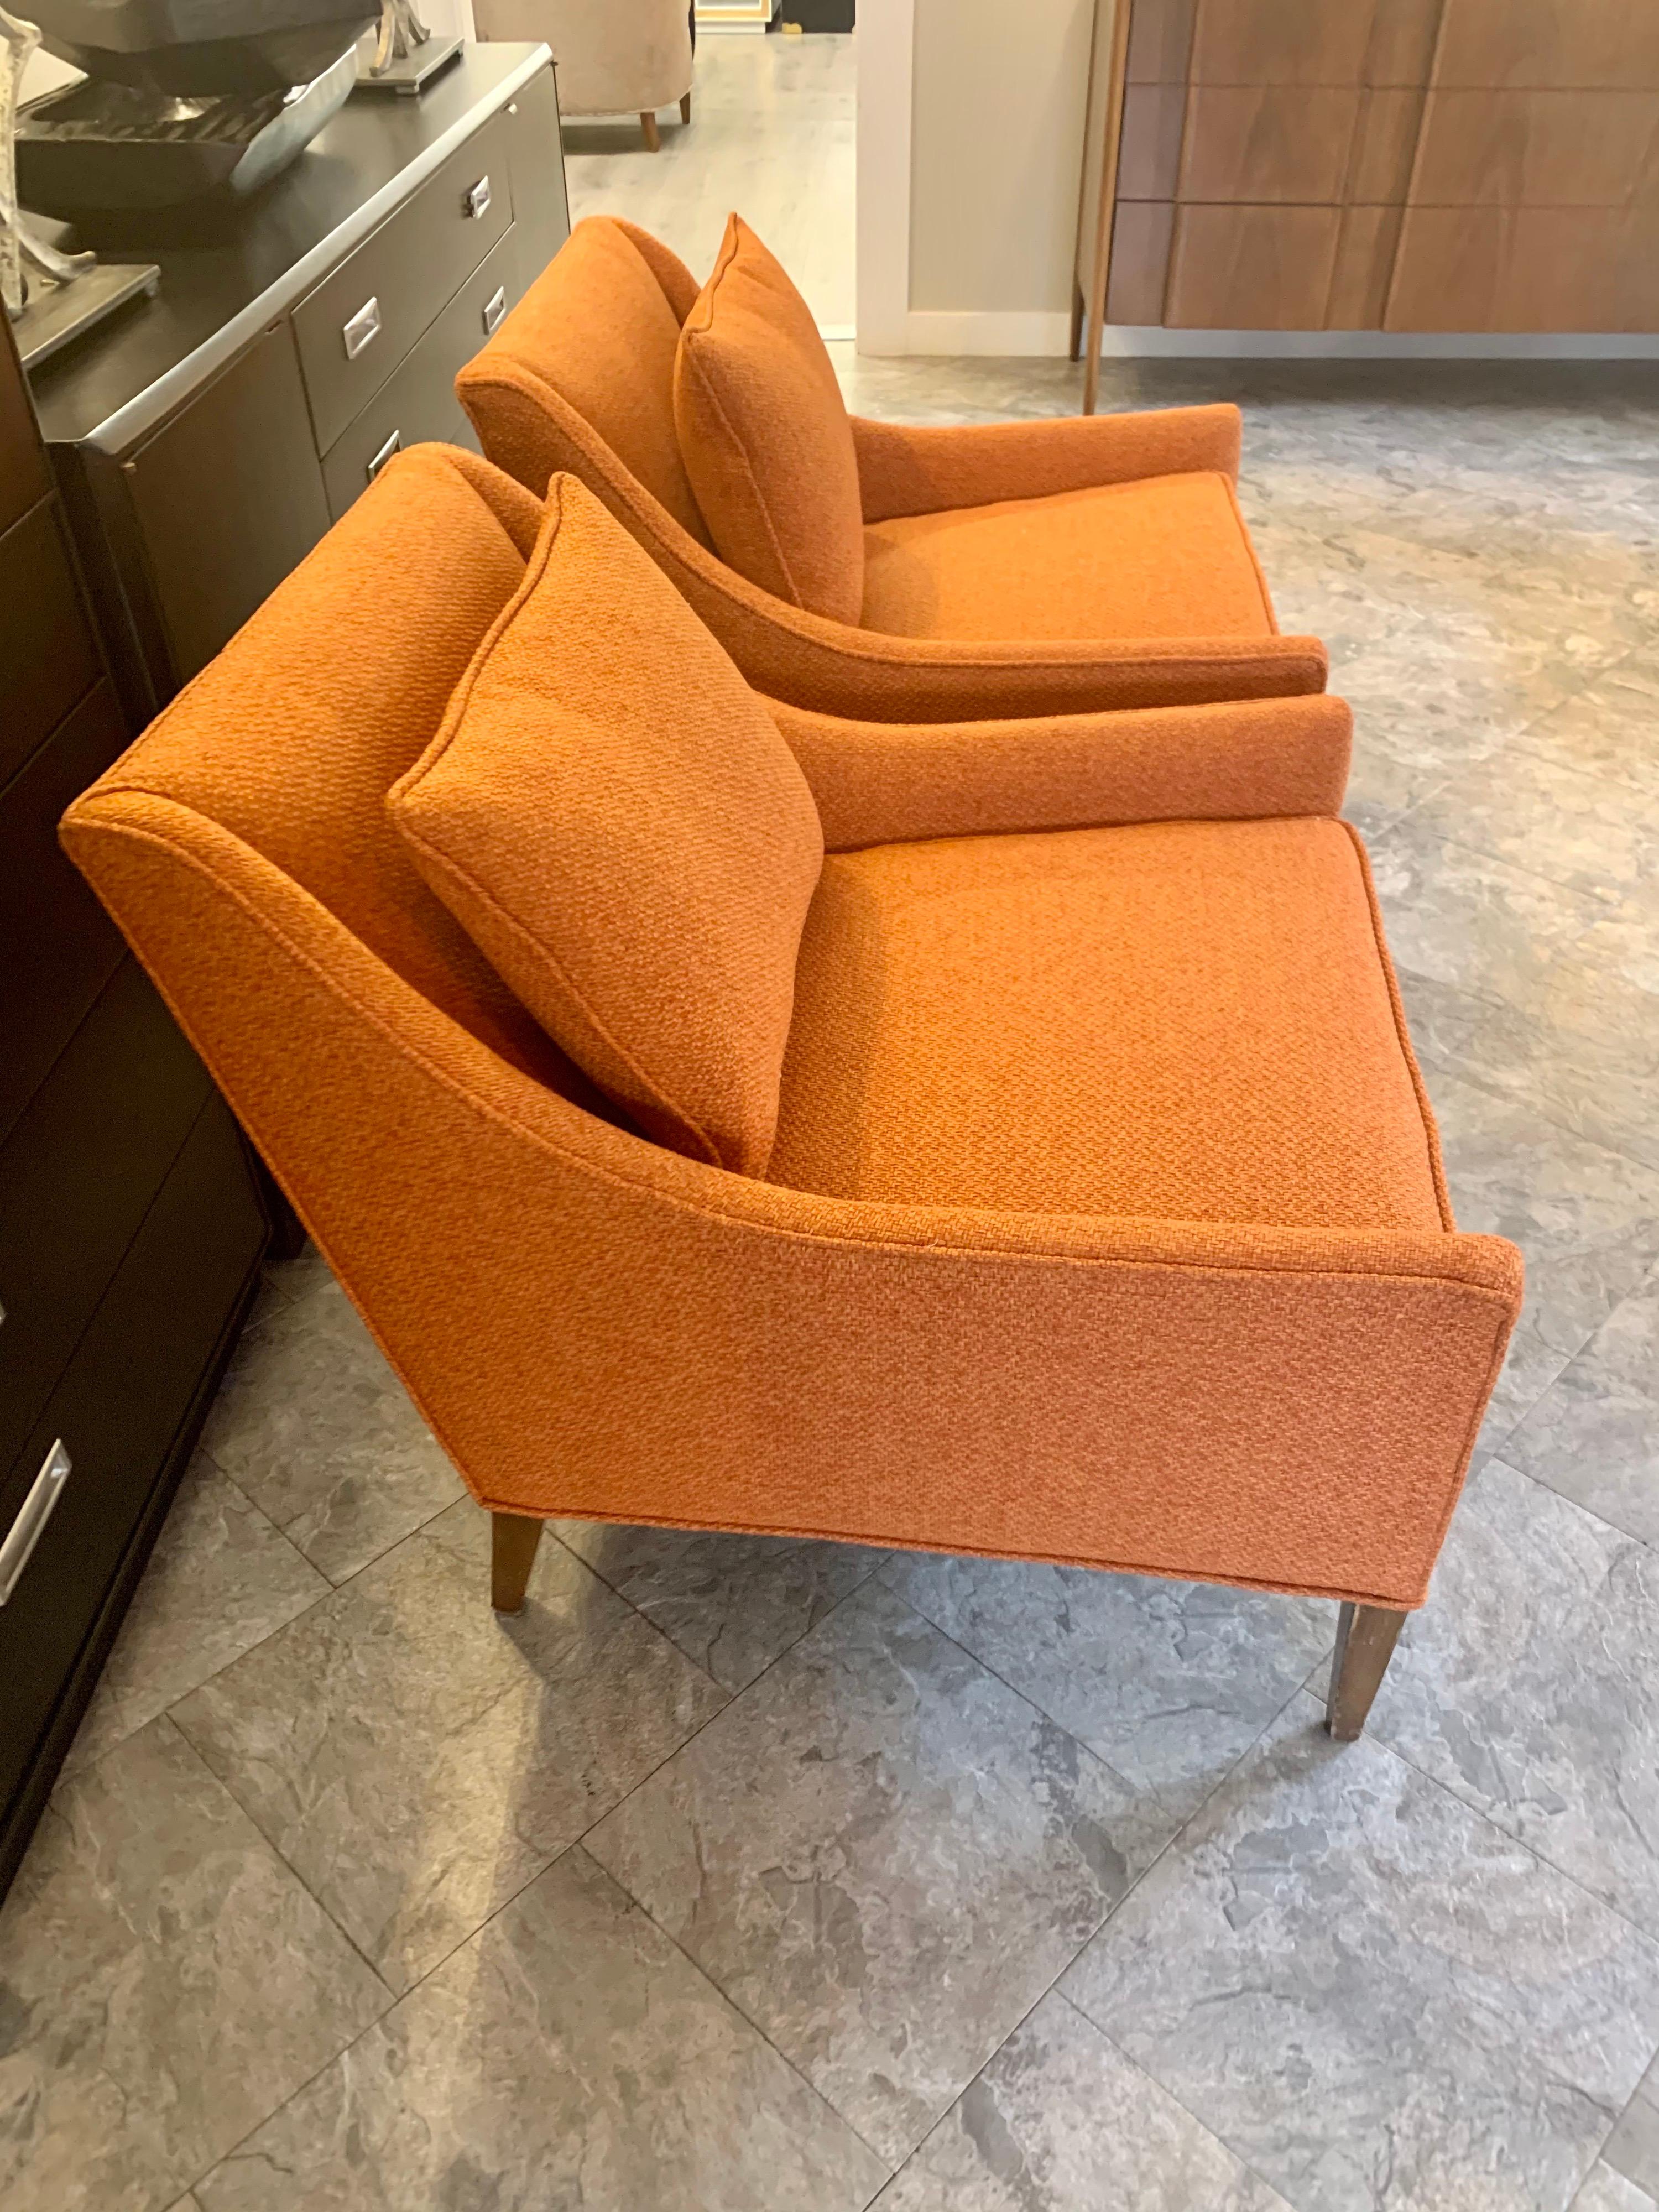 North American Pair Mid-Century Modern Newly Upholstered in Hermes Orange Colored Fabric Chairs